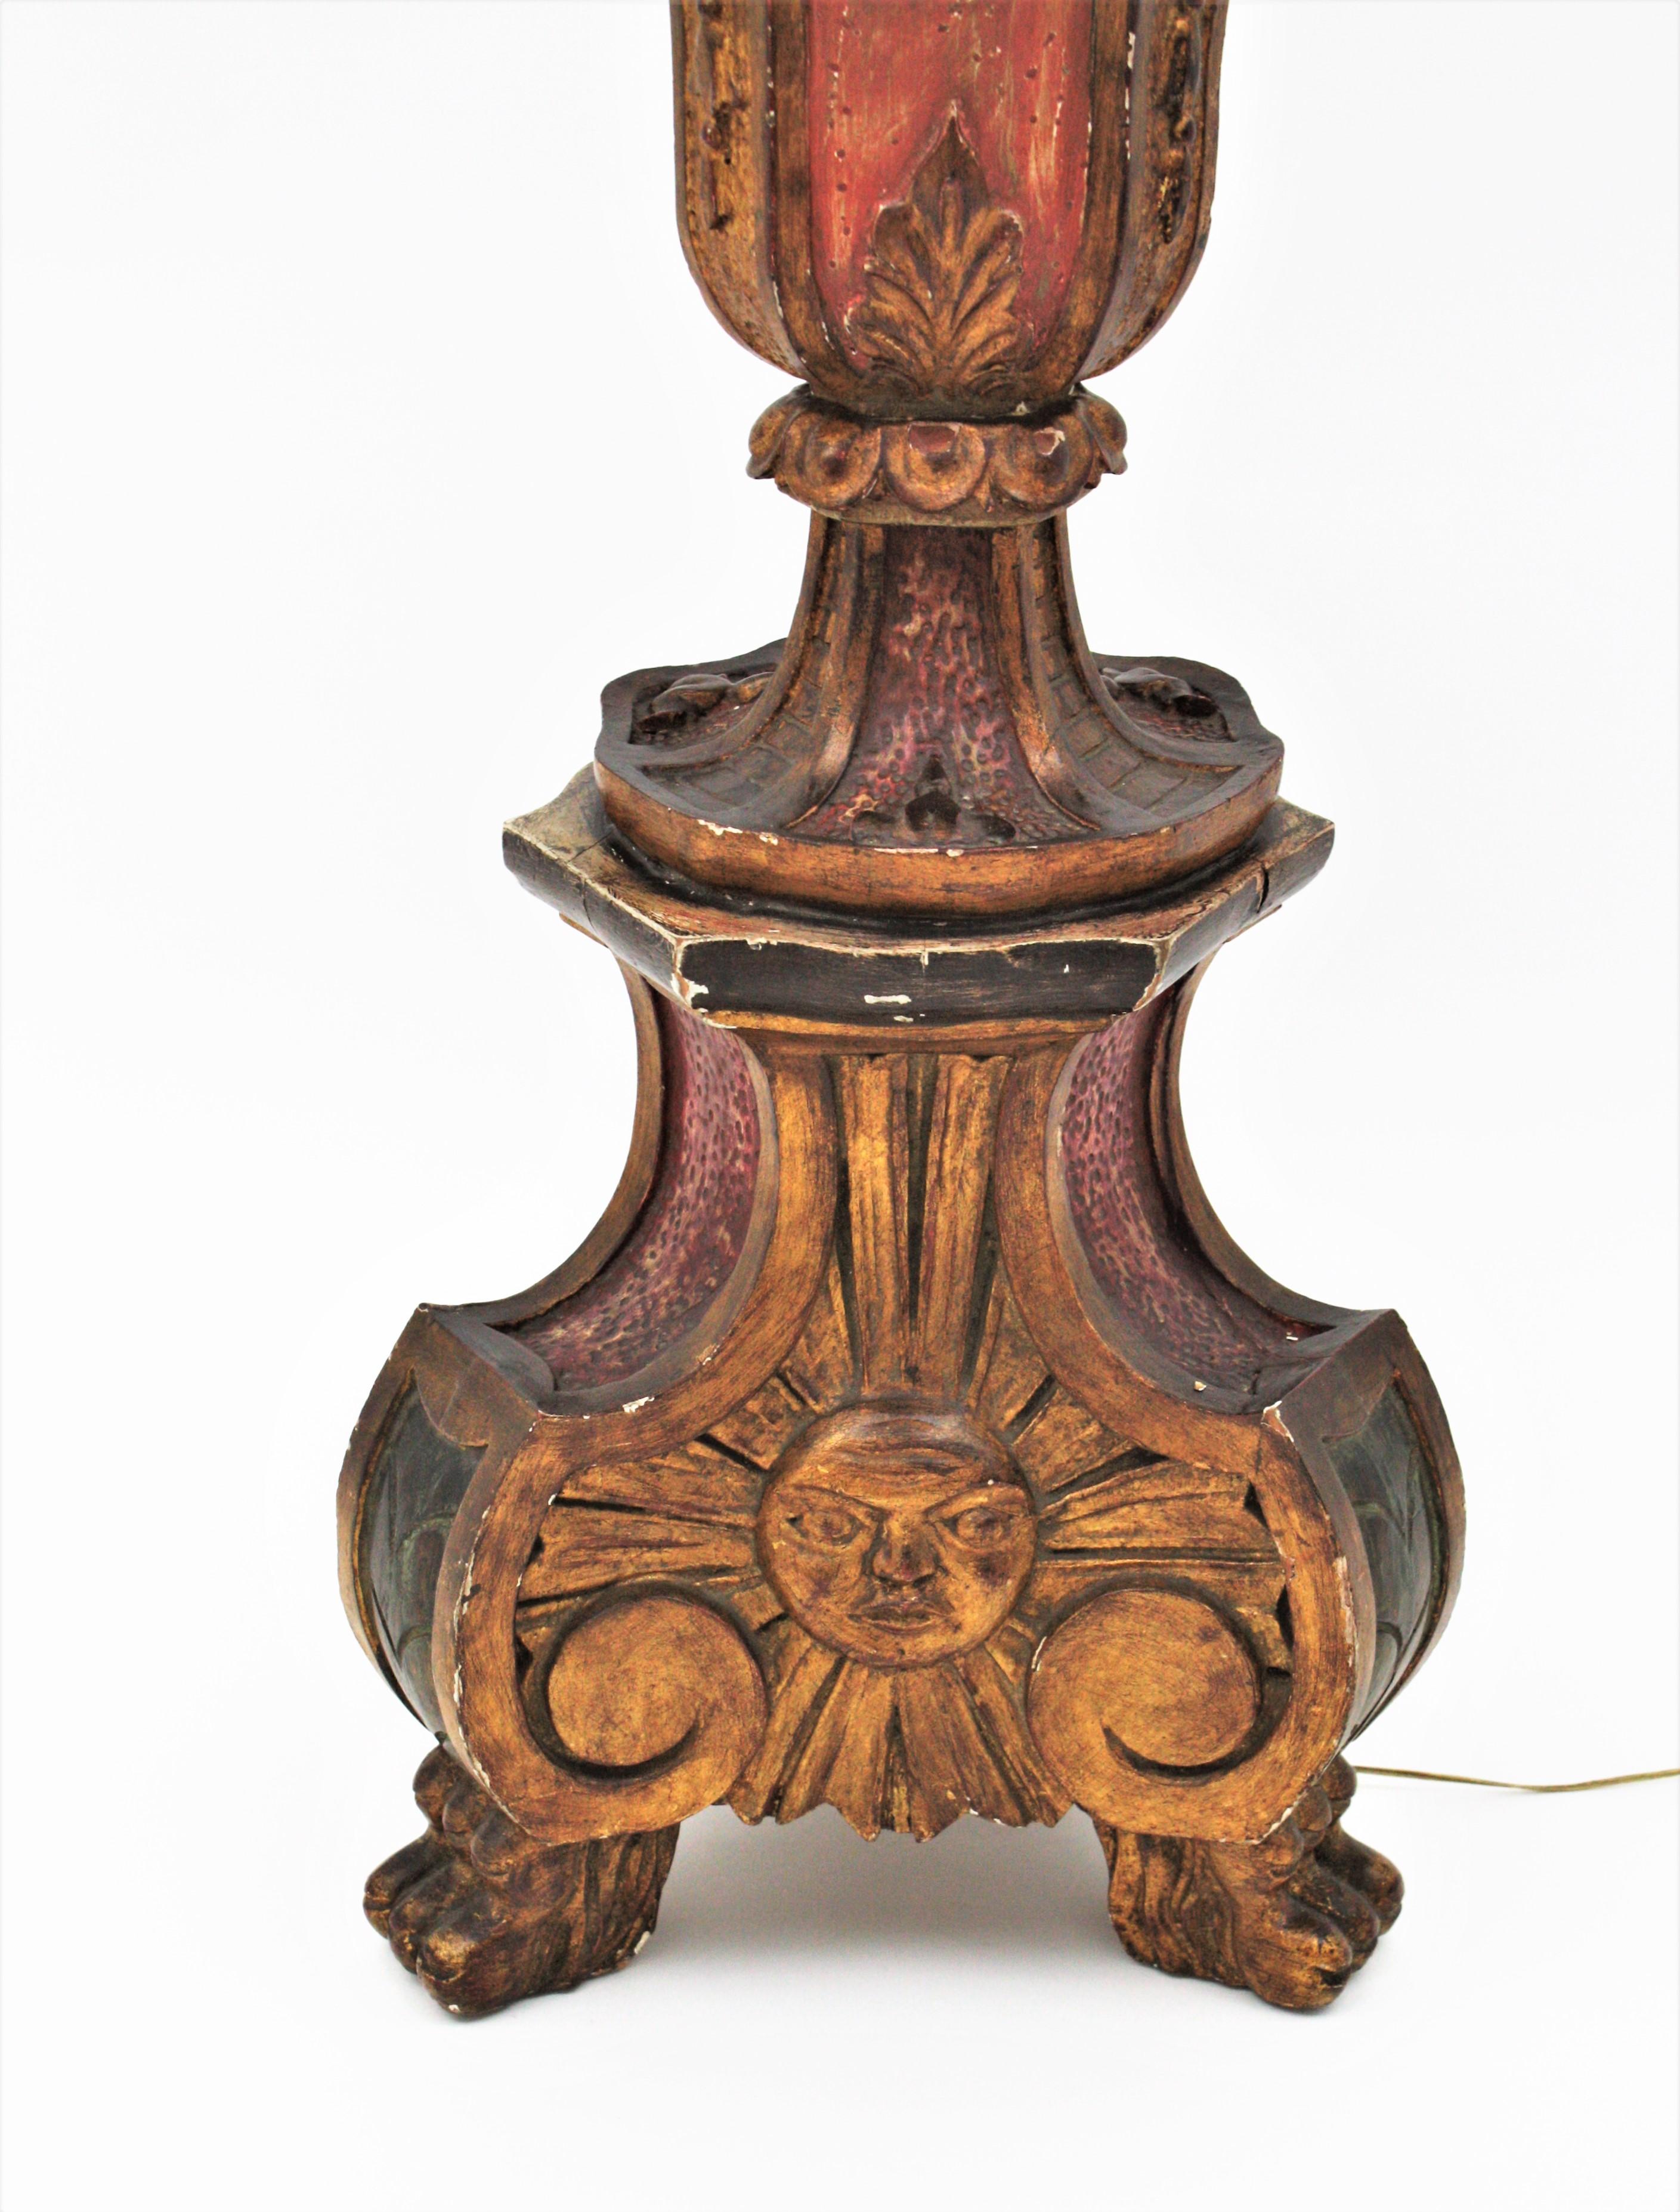 19th Century Spanish Carved Wood Torchère Floor Lamp in Baroque Style